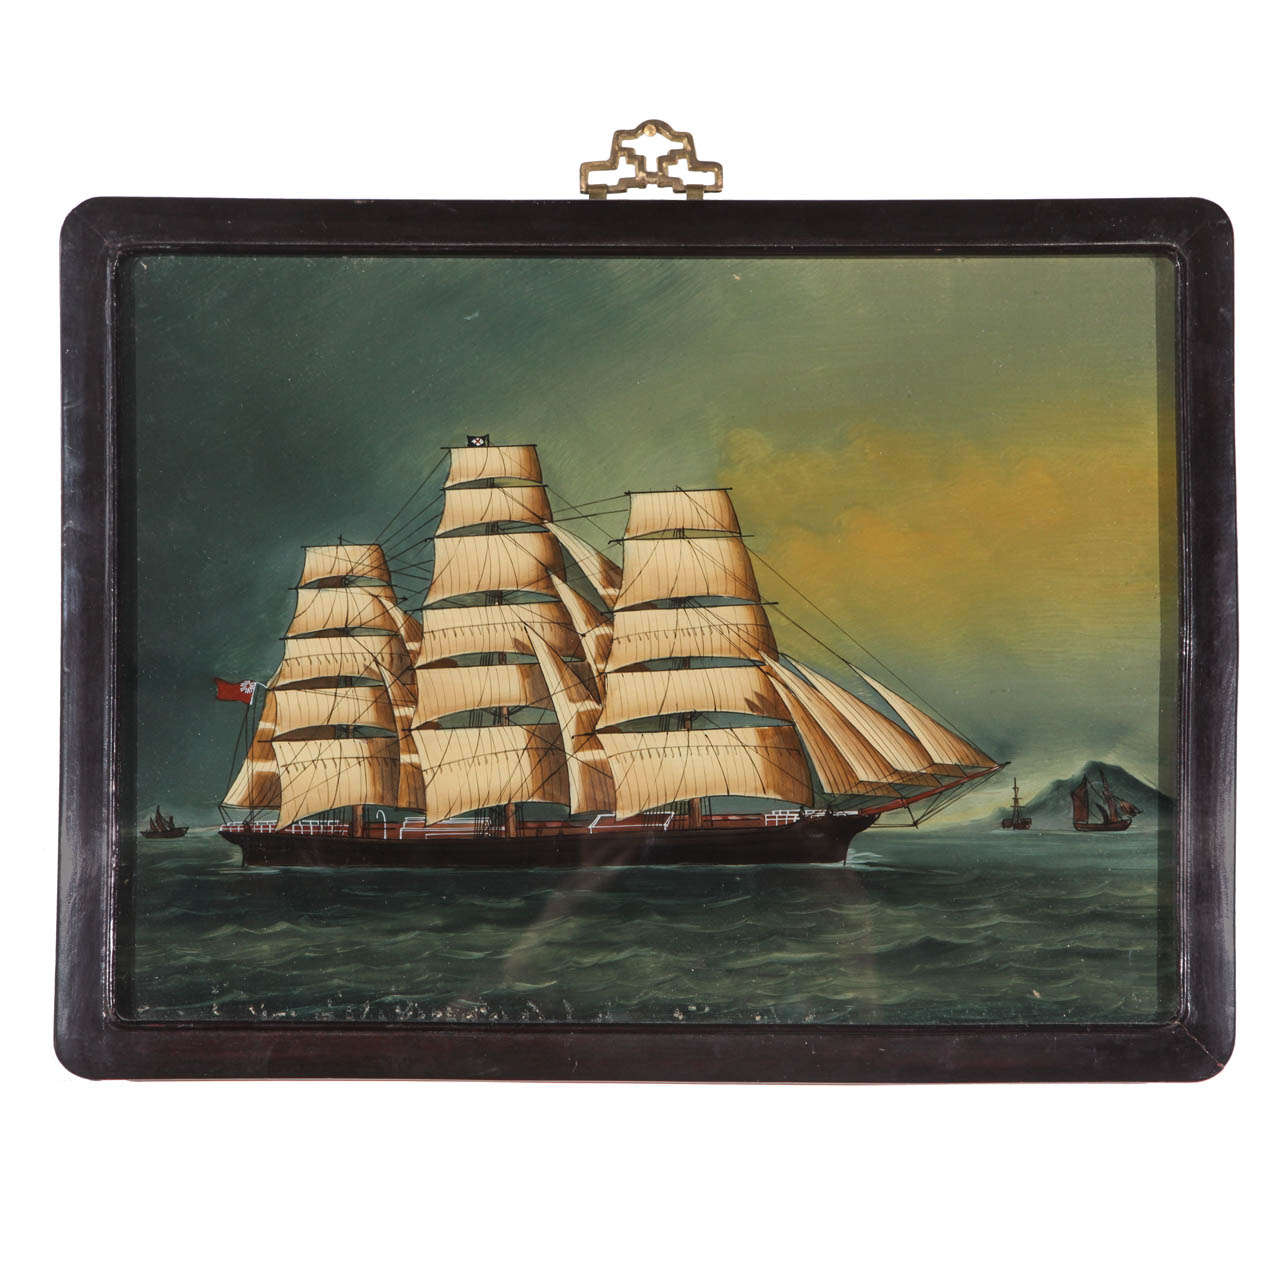 Reverse Painting of Ship on Glass